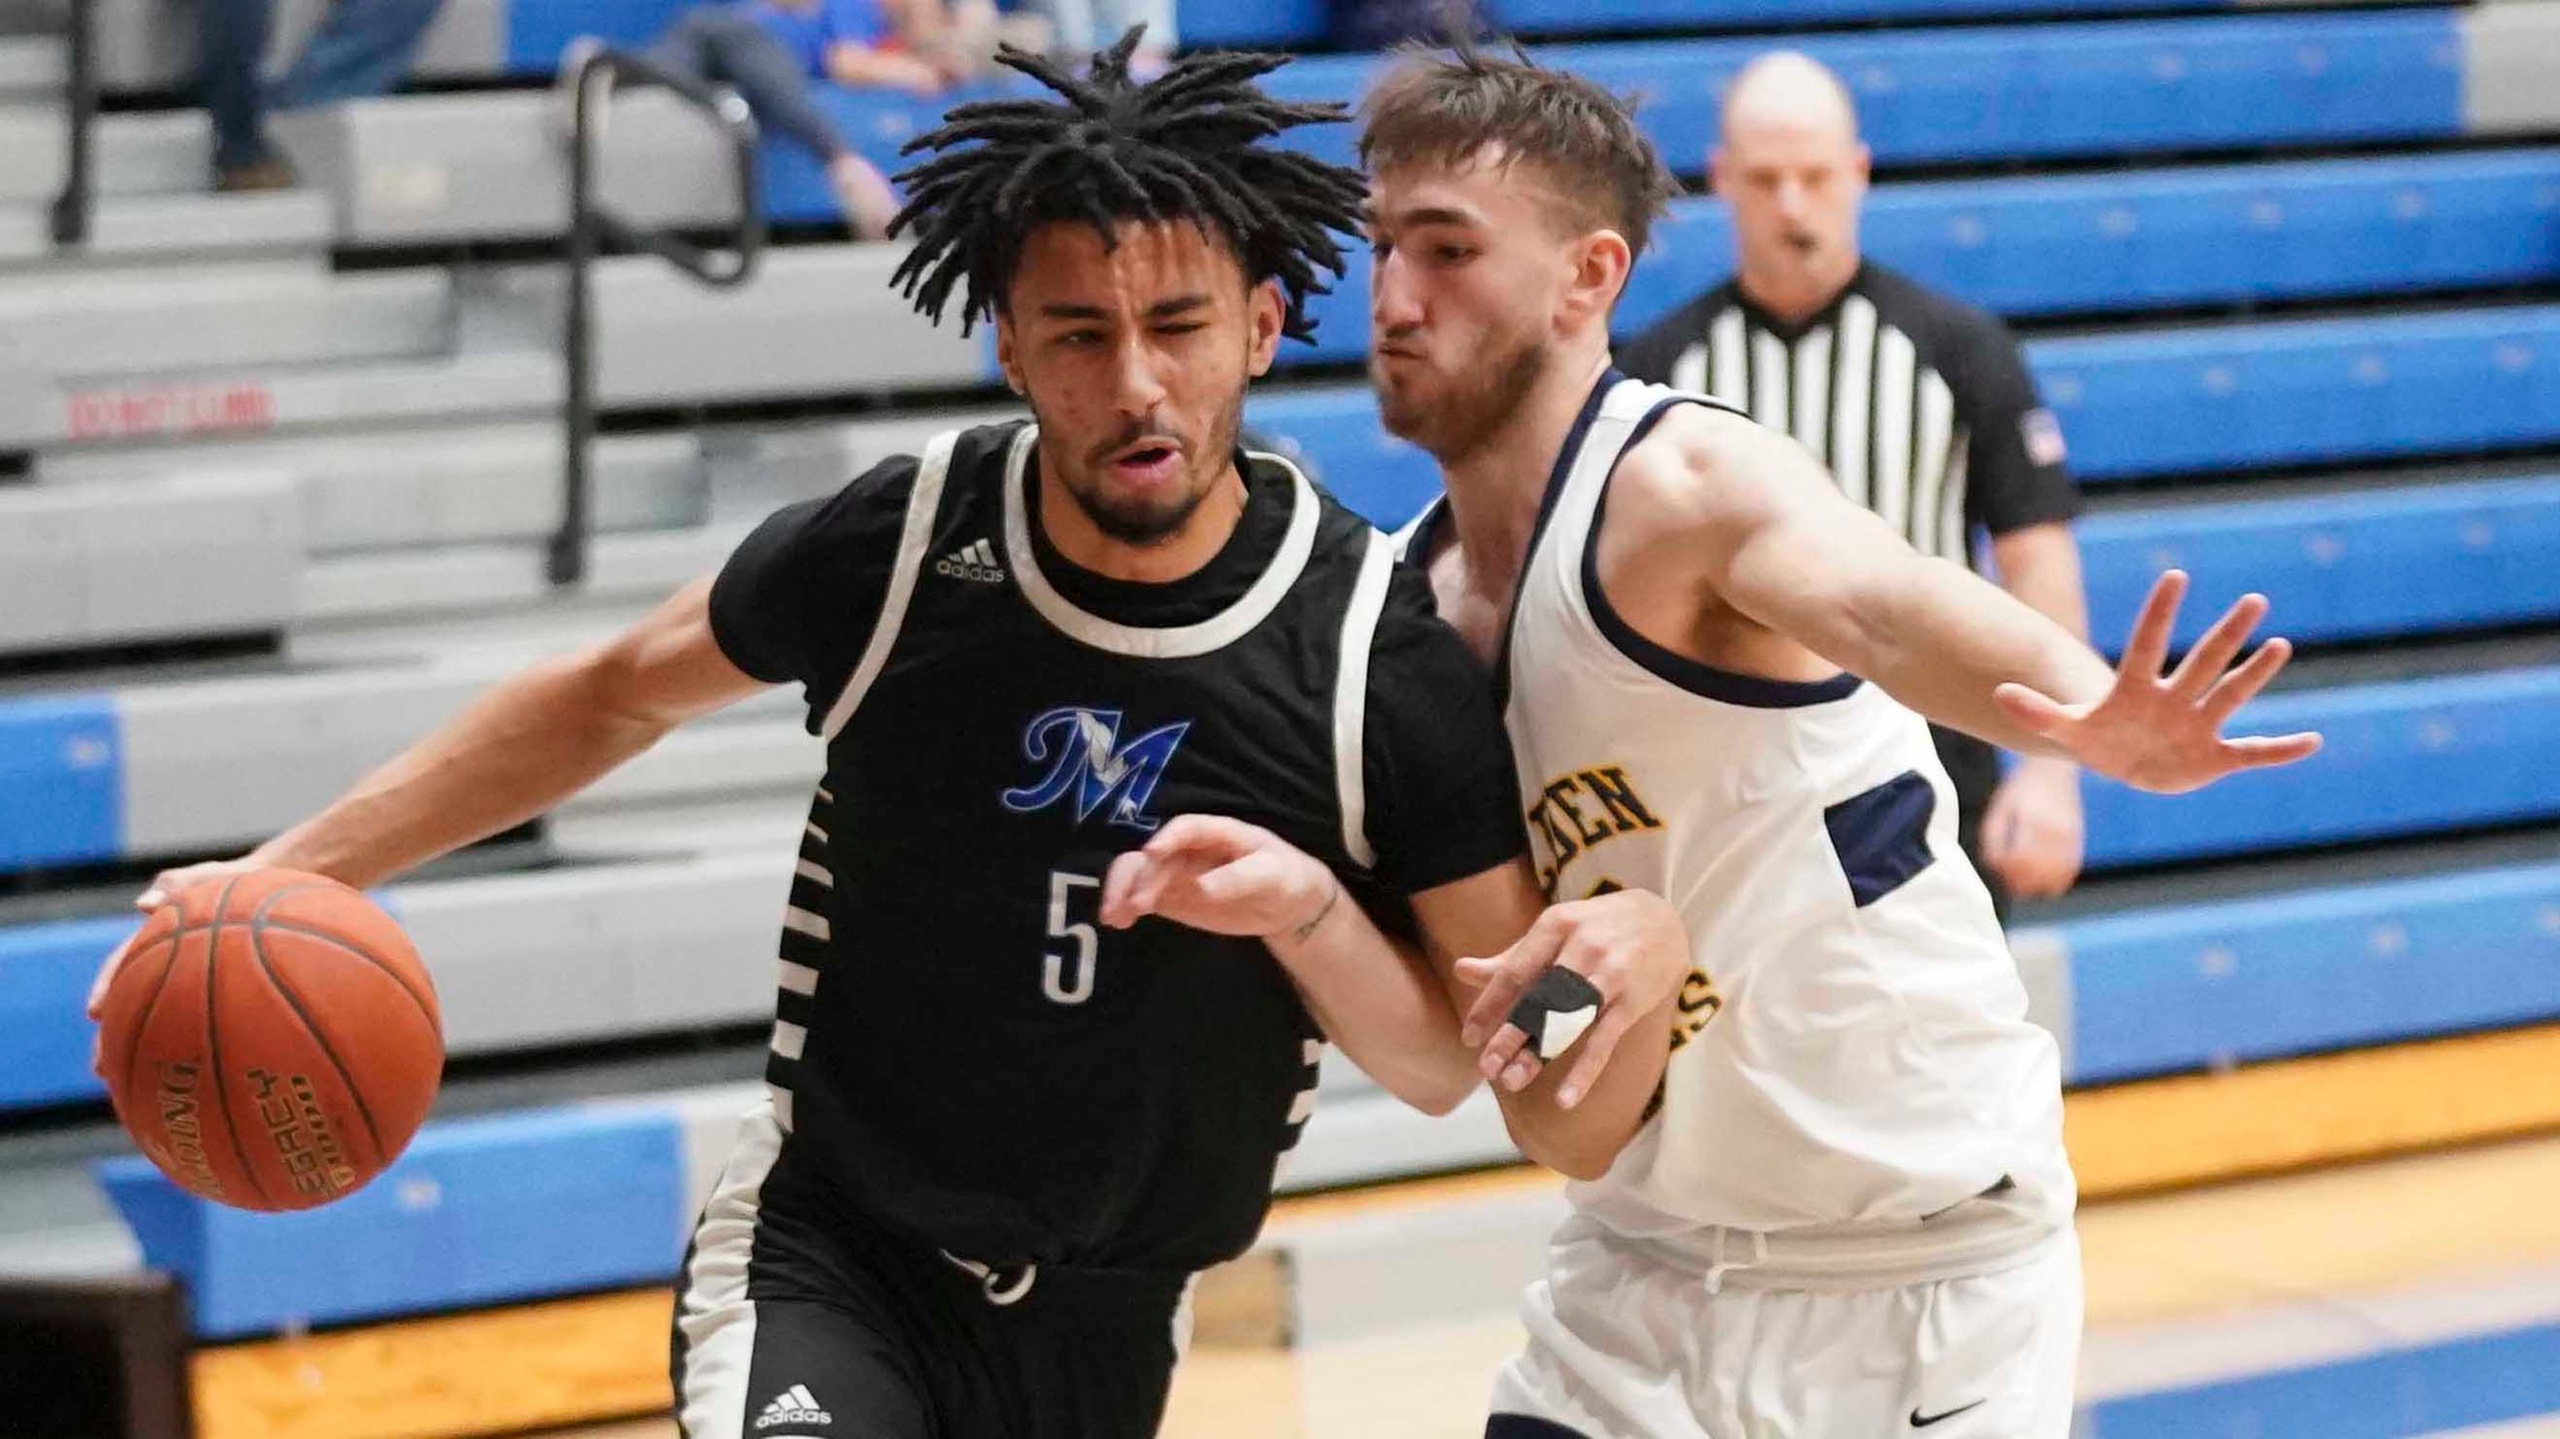 MCC men’s offense sizzles late in win over Rattlers